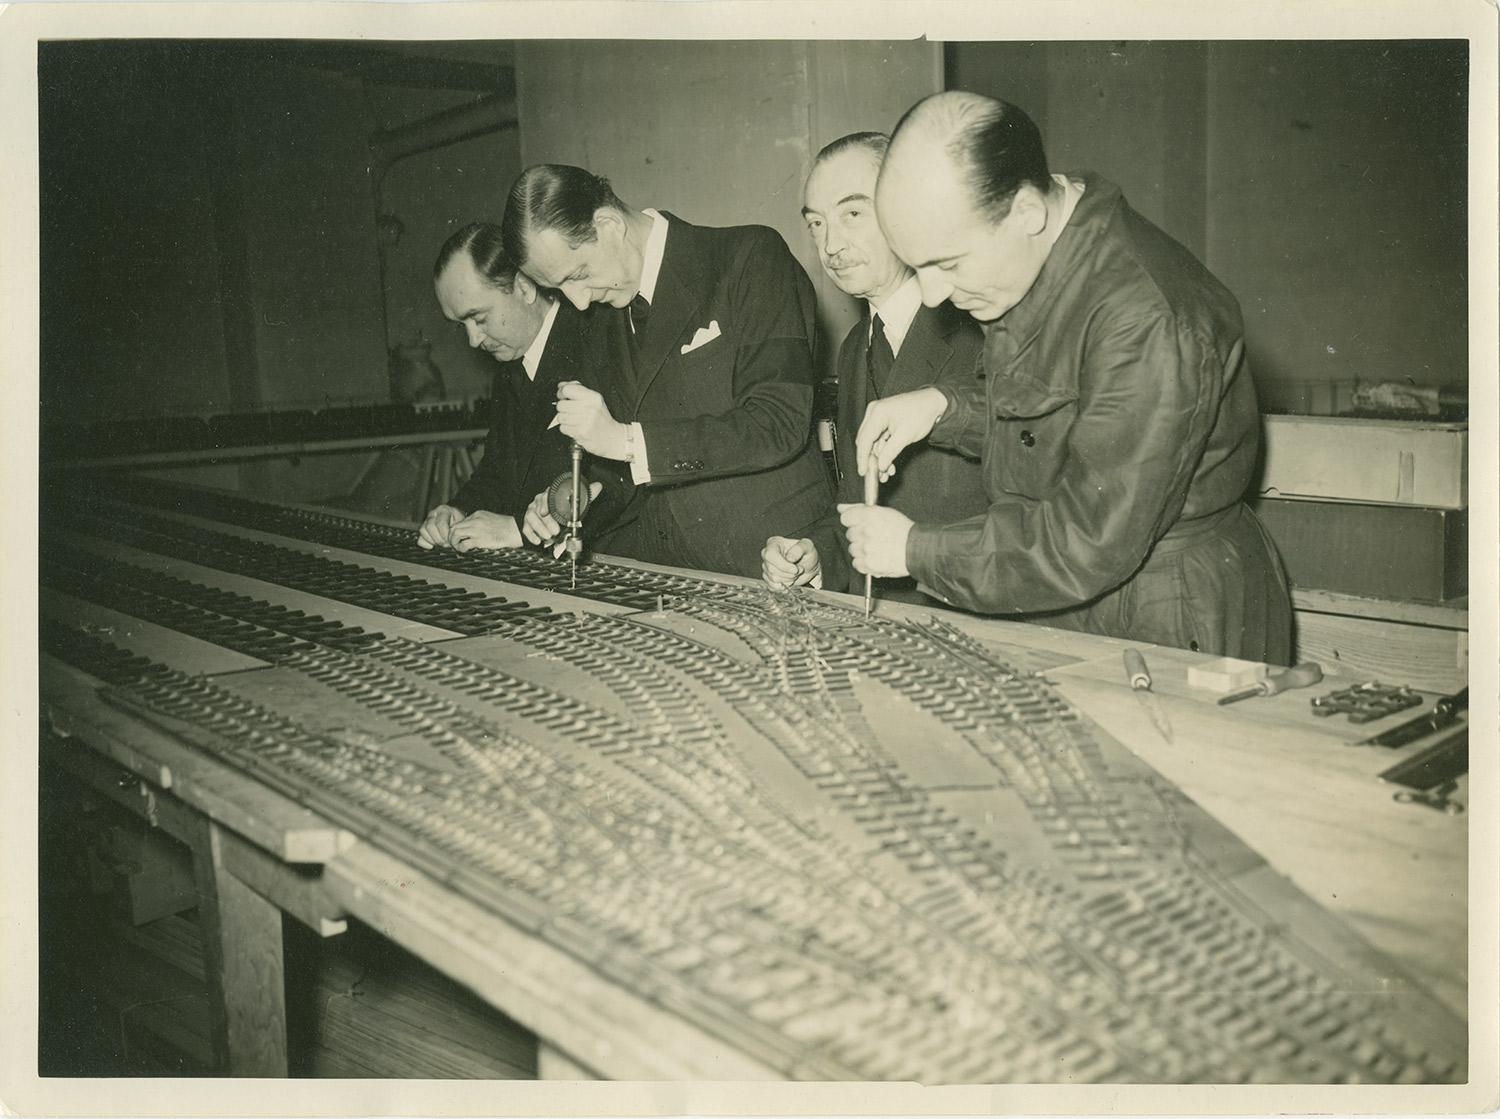 Grand Duke Dmitri at the Chateau de Beaumesnil adding the finishing touches to his railroad. 1930s.